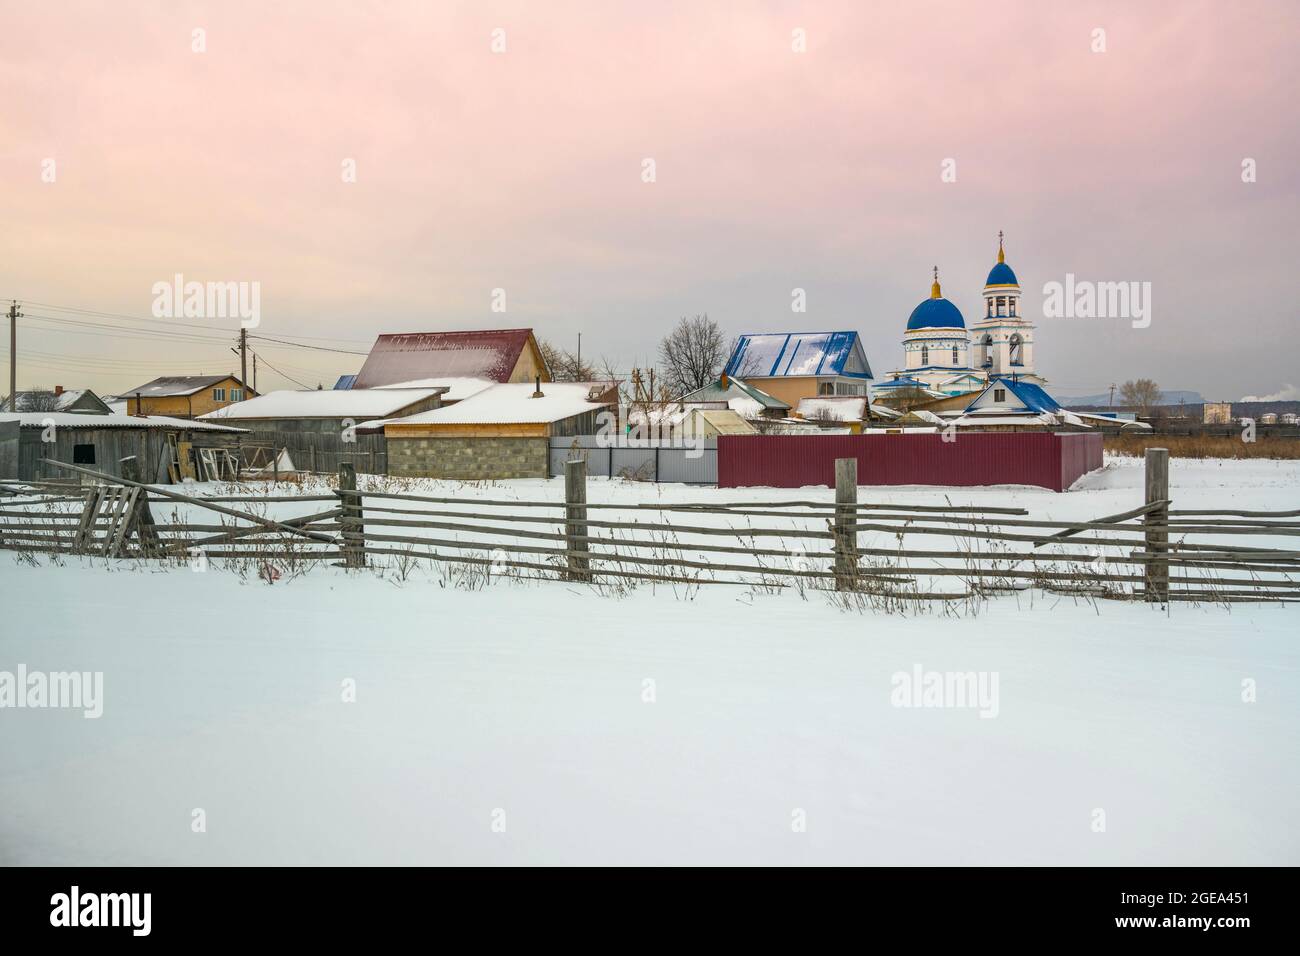 The domes of a small Orthodox church rise over a village in the Ural Mountains region in Russia. Stock Photo